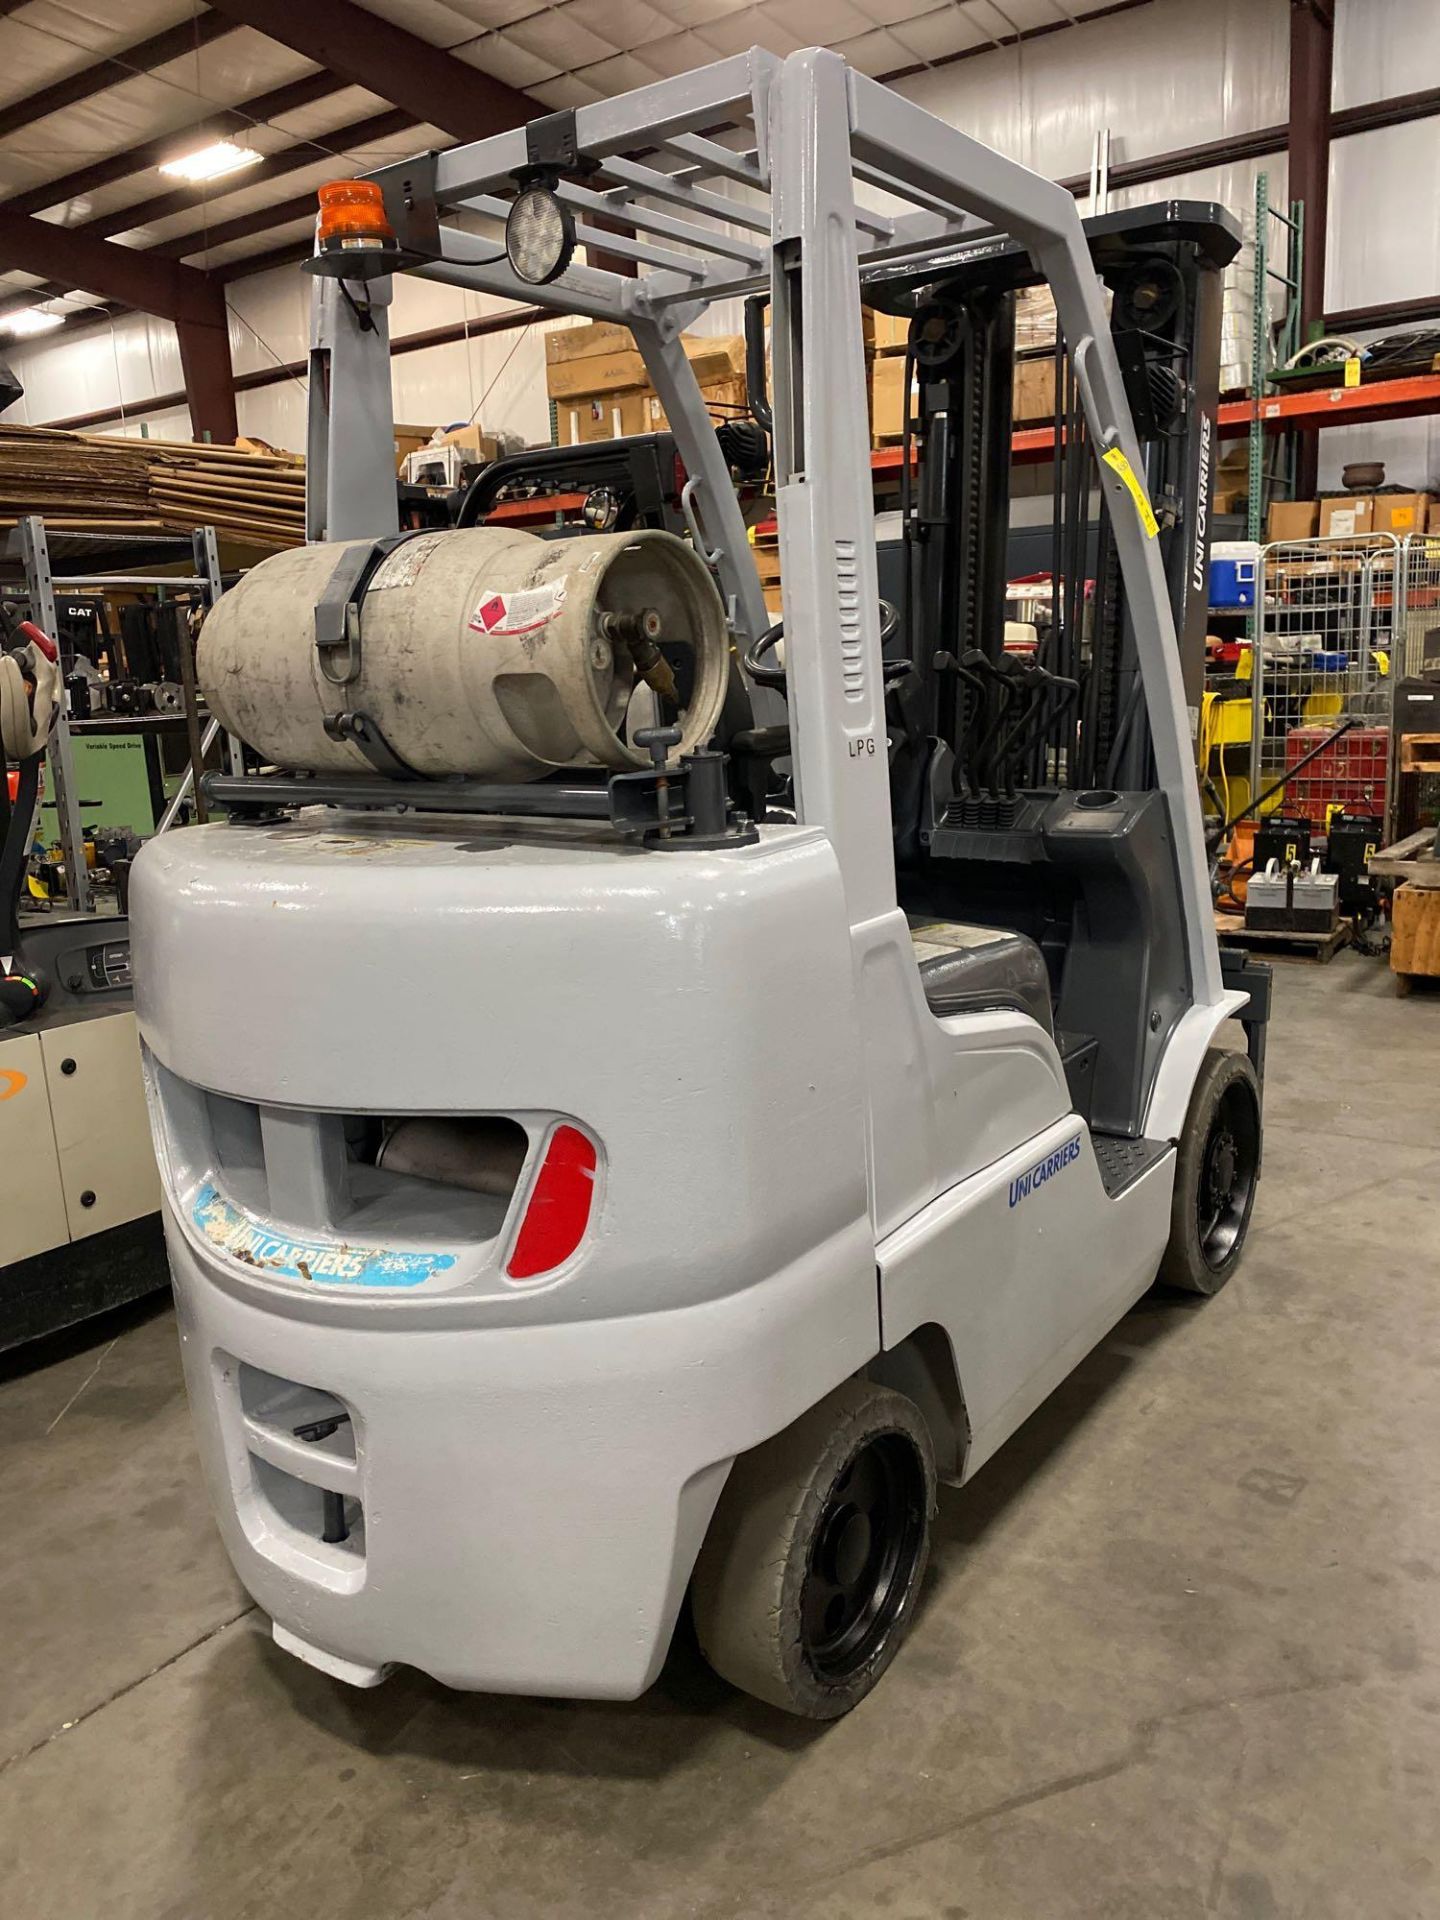 2014 UNICARRIERS LP FORKLIFT MODEL MCUG1F2F30LV, APPROX. 6,000 LB CAPACITY - Image 2 of 10